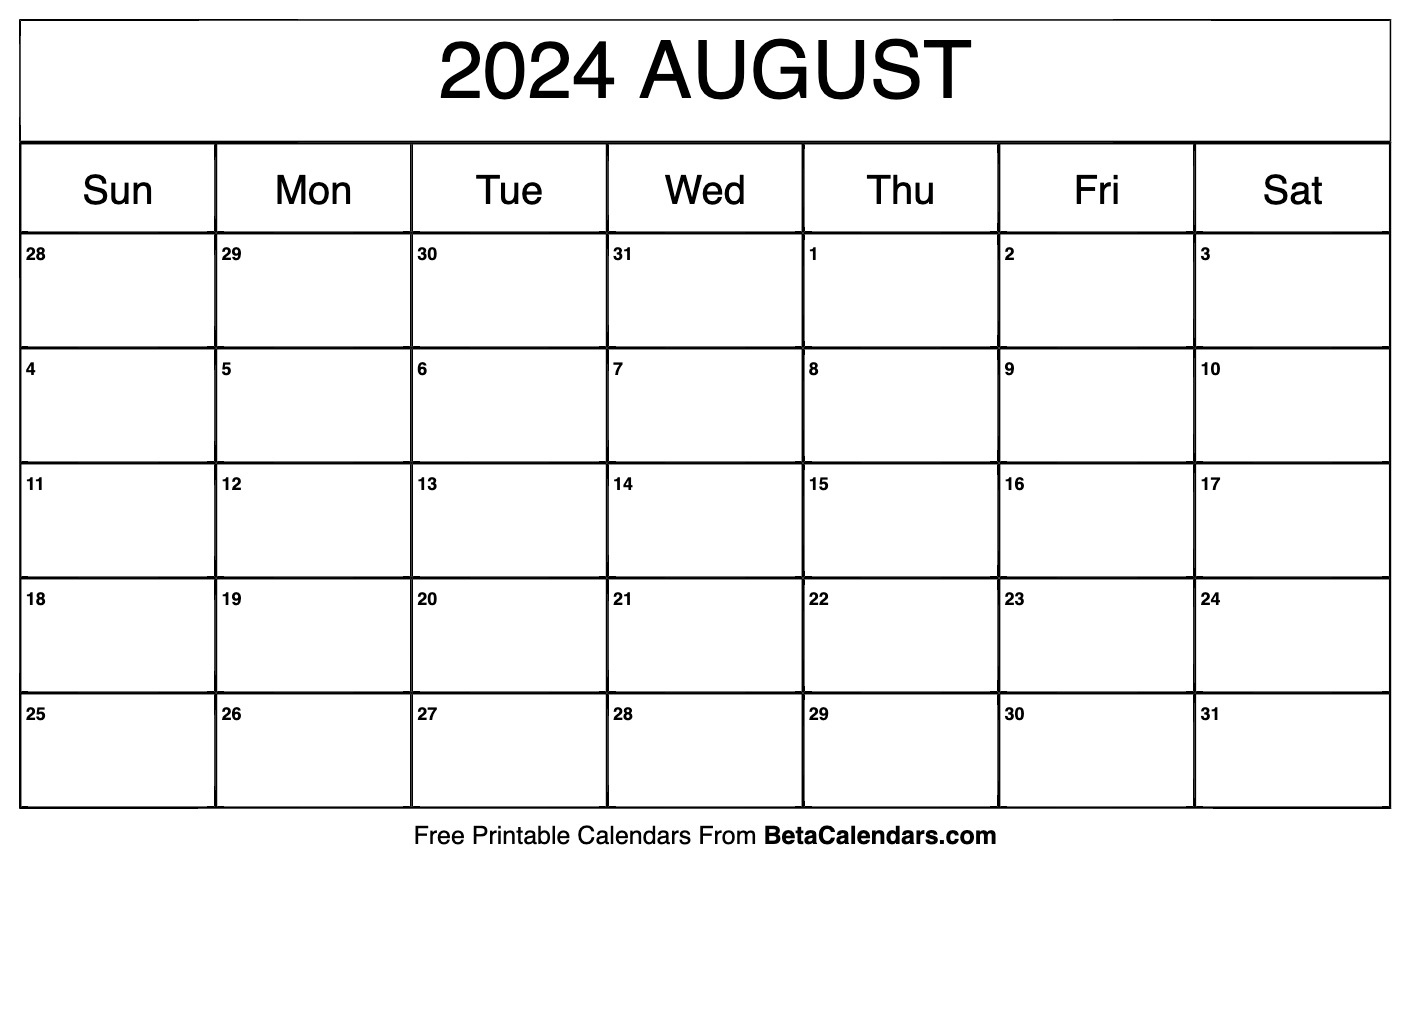 Free Printable August 2024 Calendar with Free Printable August 2024 Calendar With Lines